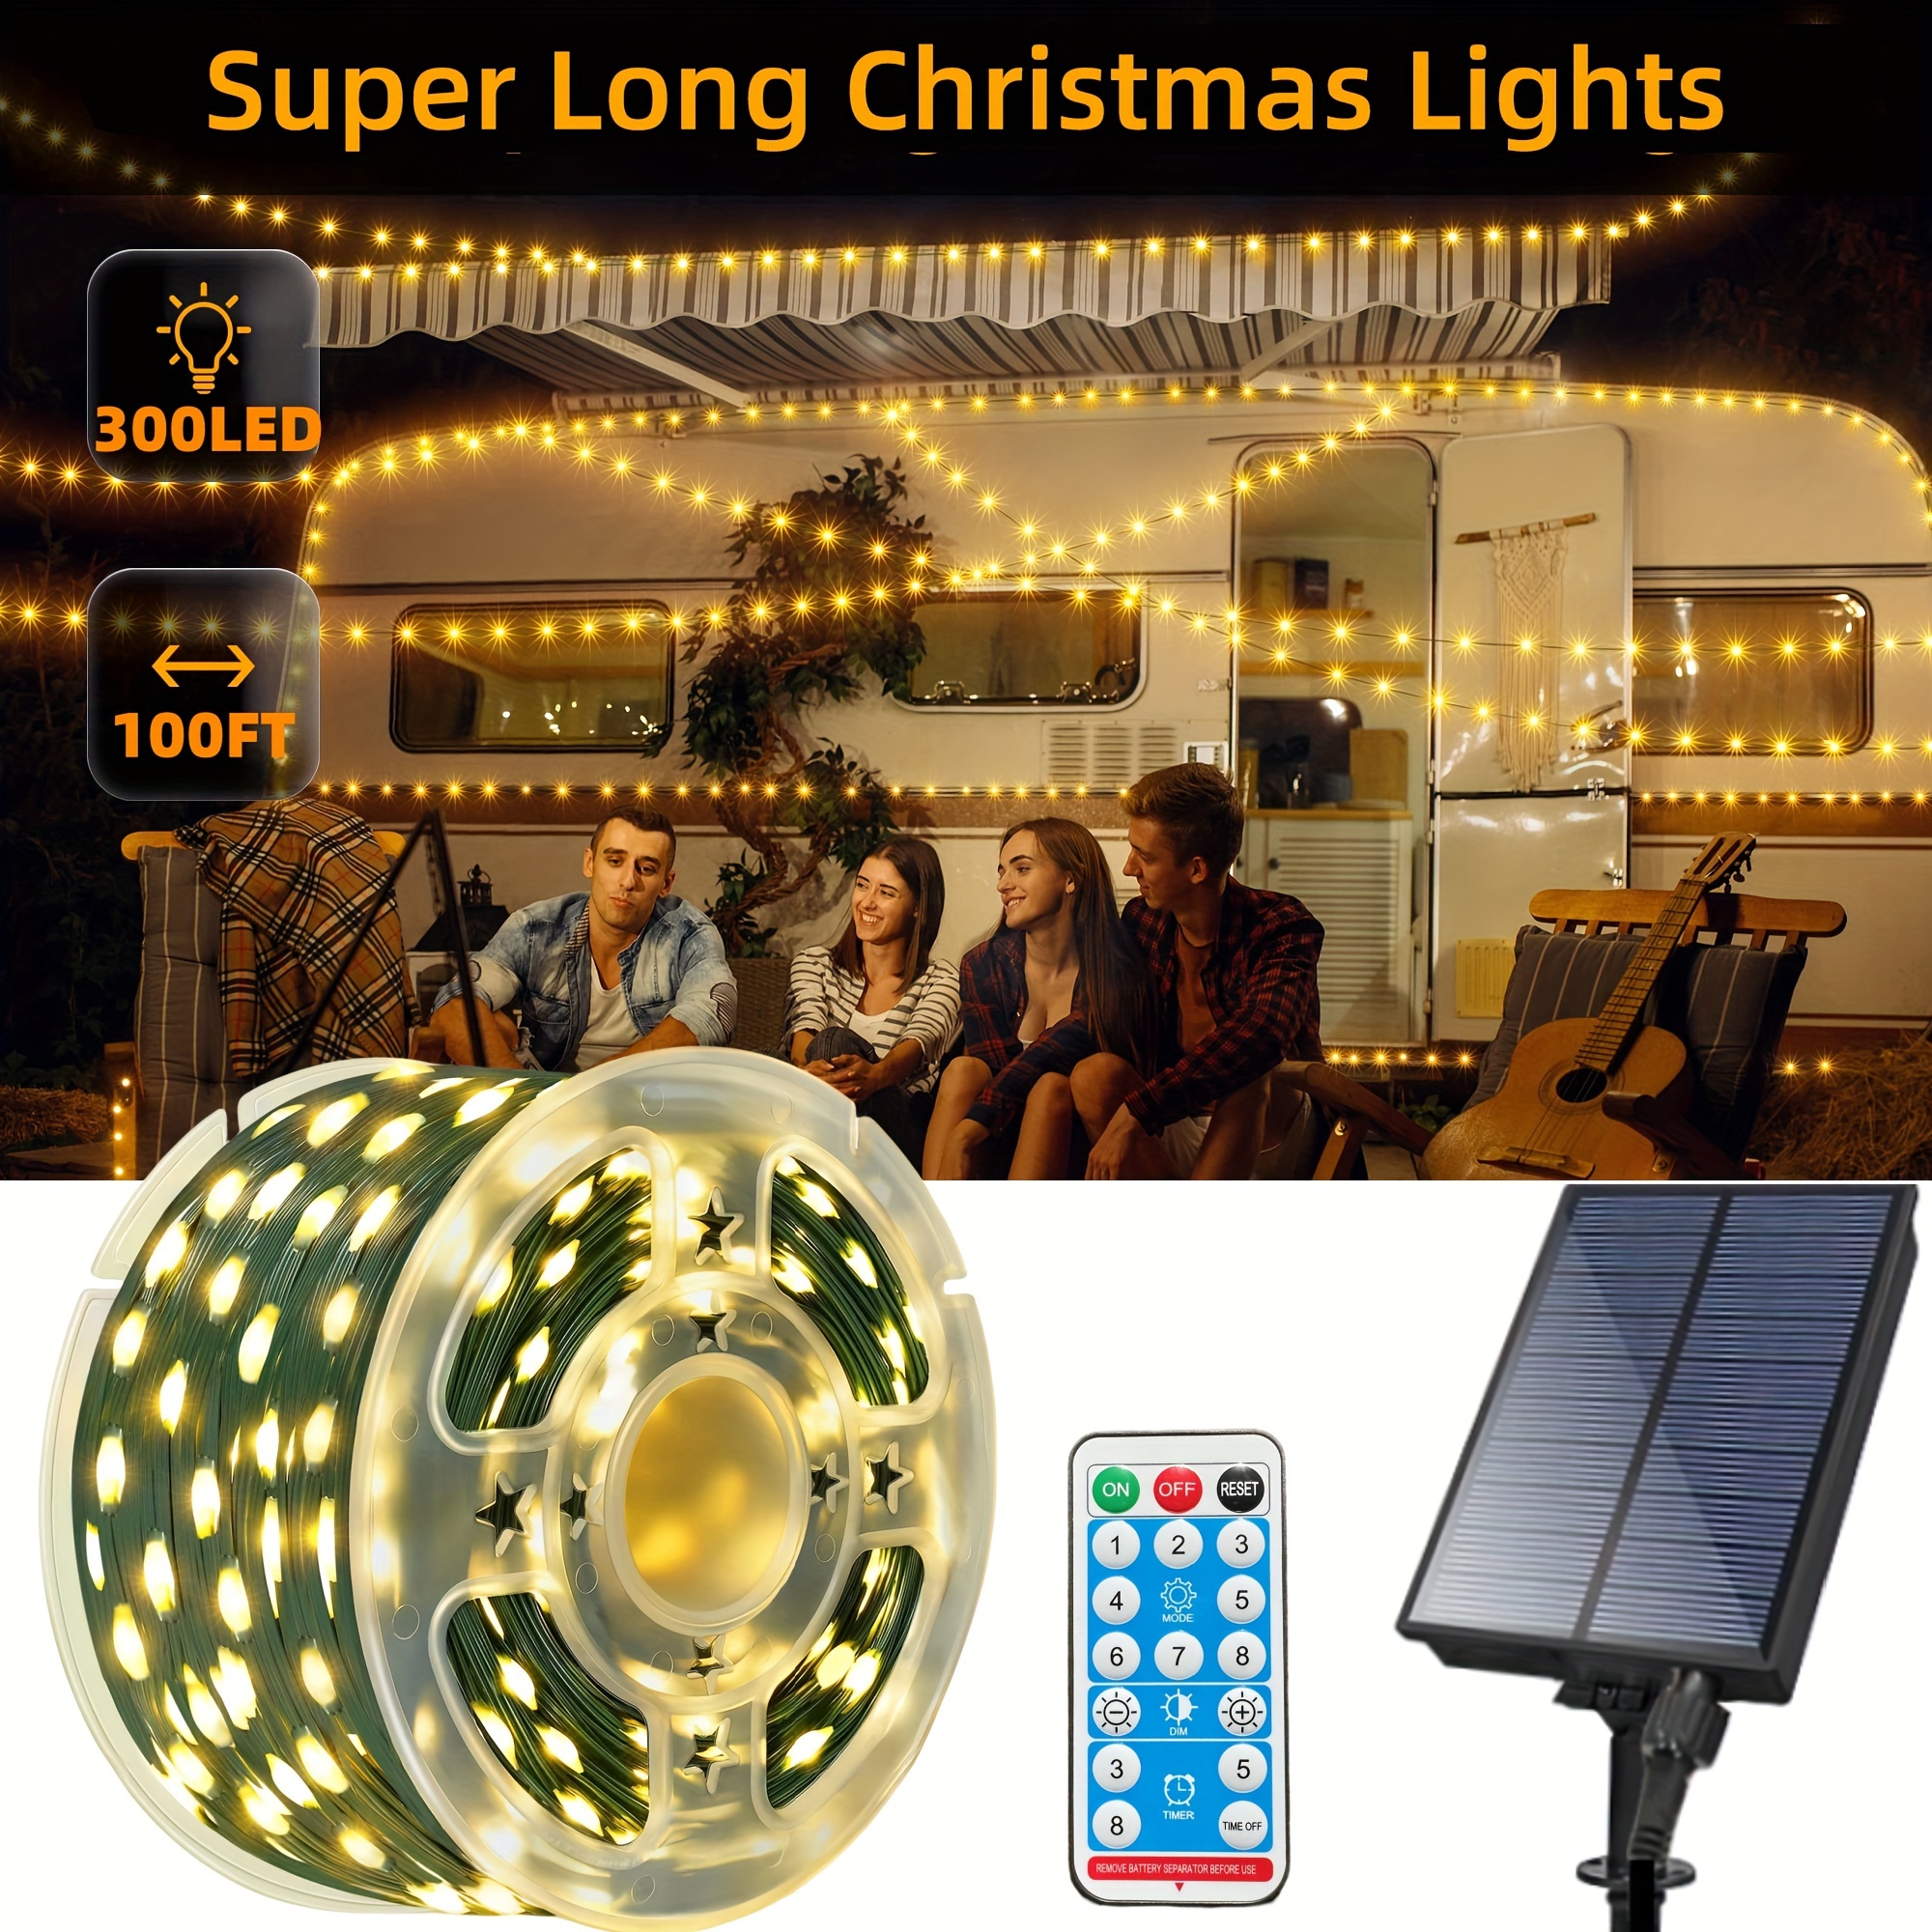 

110ft Solar-powered Led Fairy Lights - 300 Bulbs, Waterproof Outdoor Christmas Tree & Yard Lighting With Remote Control And Timer, Multicolor